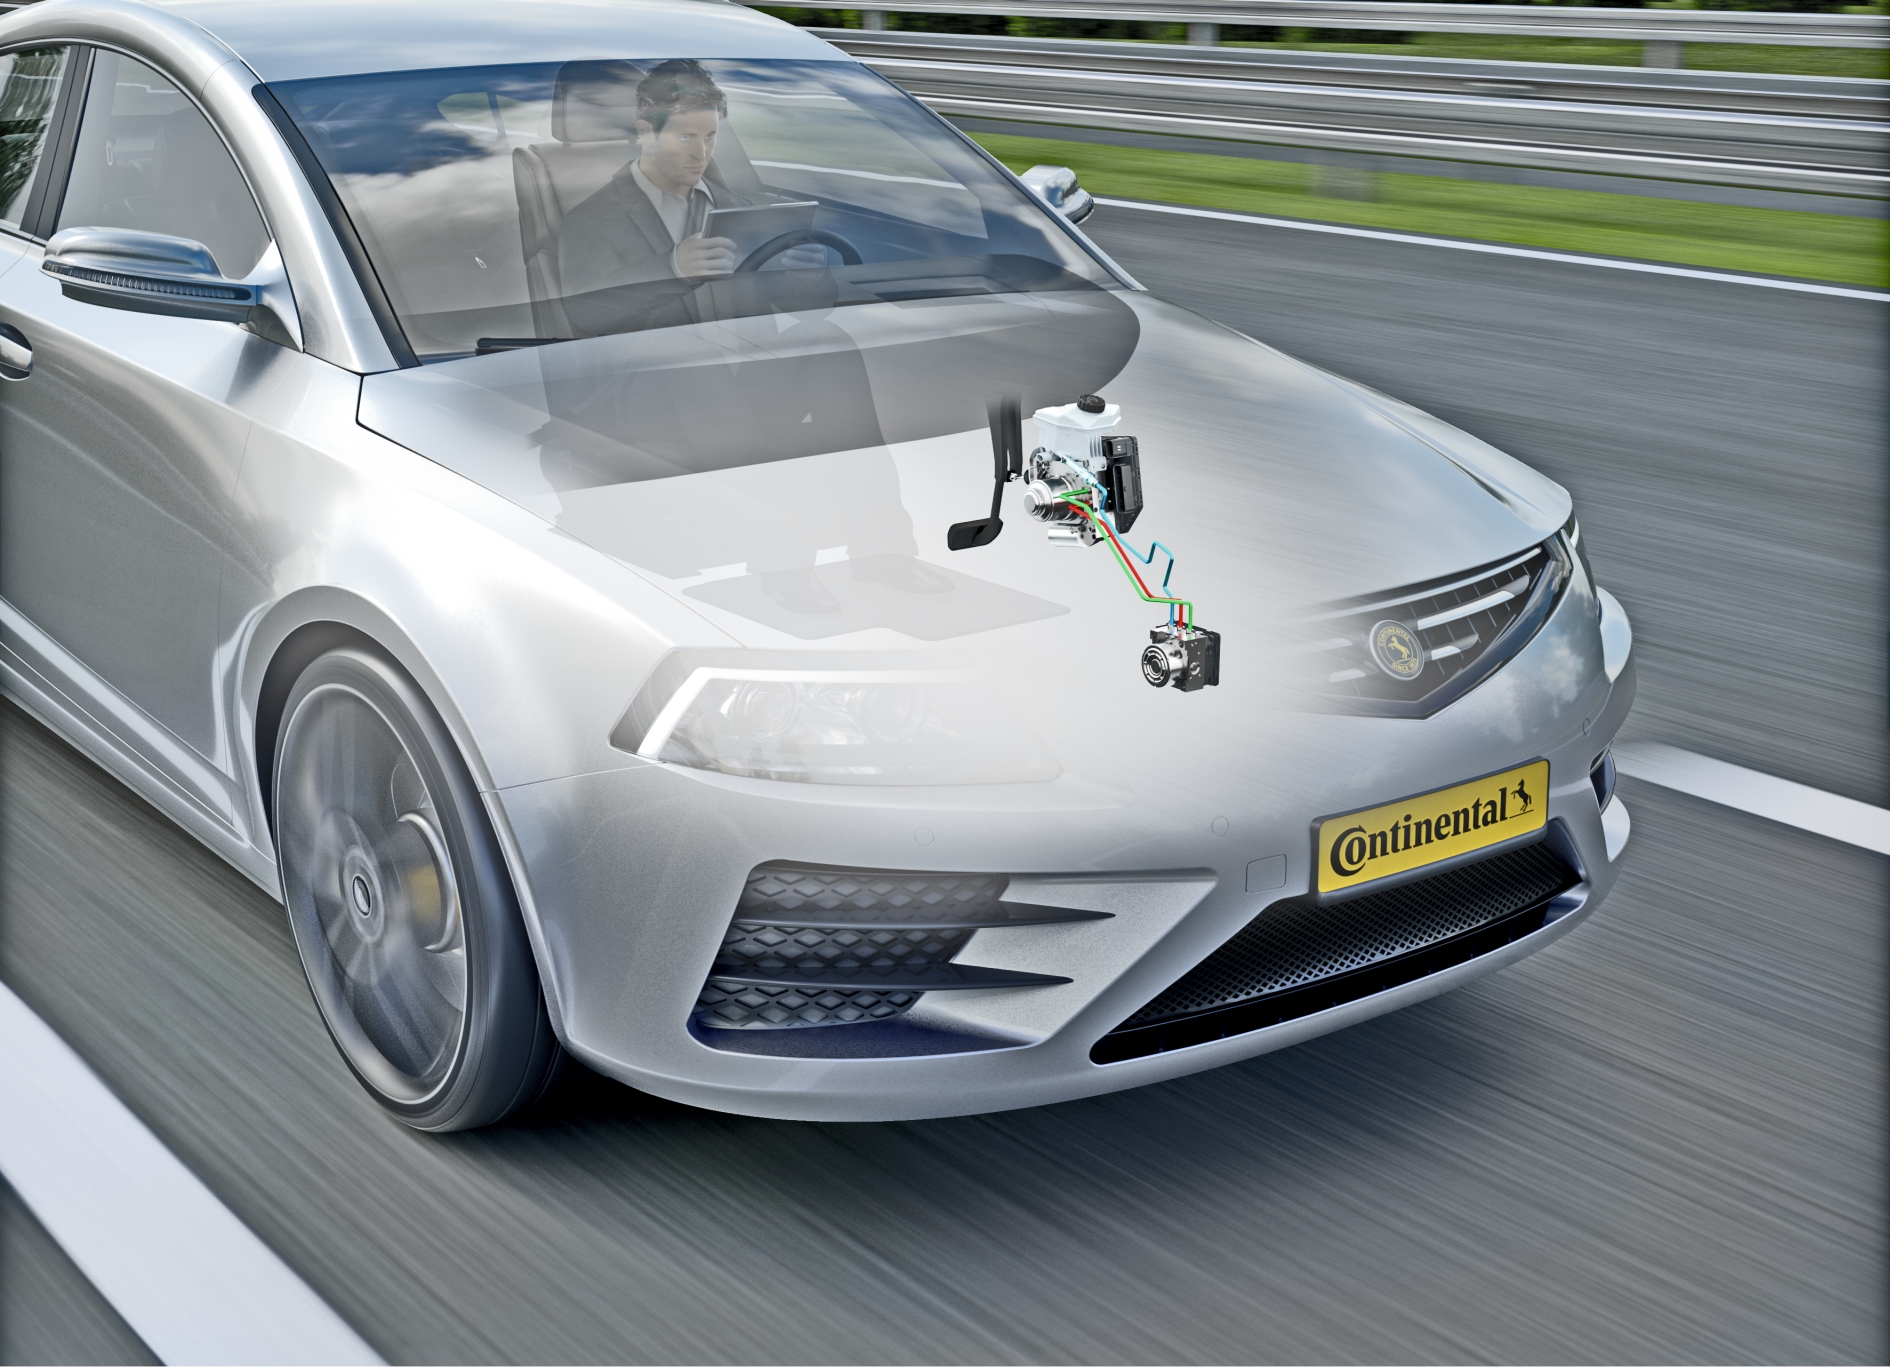 Continental Develops MK C1 Brake Technology as Next Step to Automated Driving